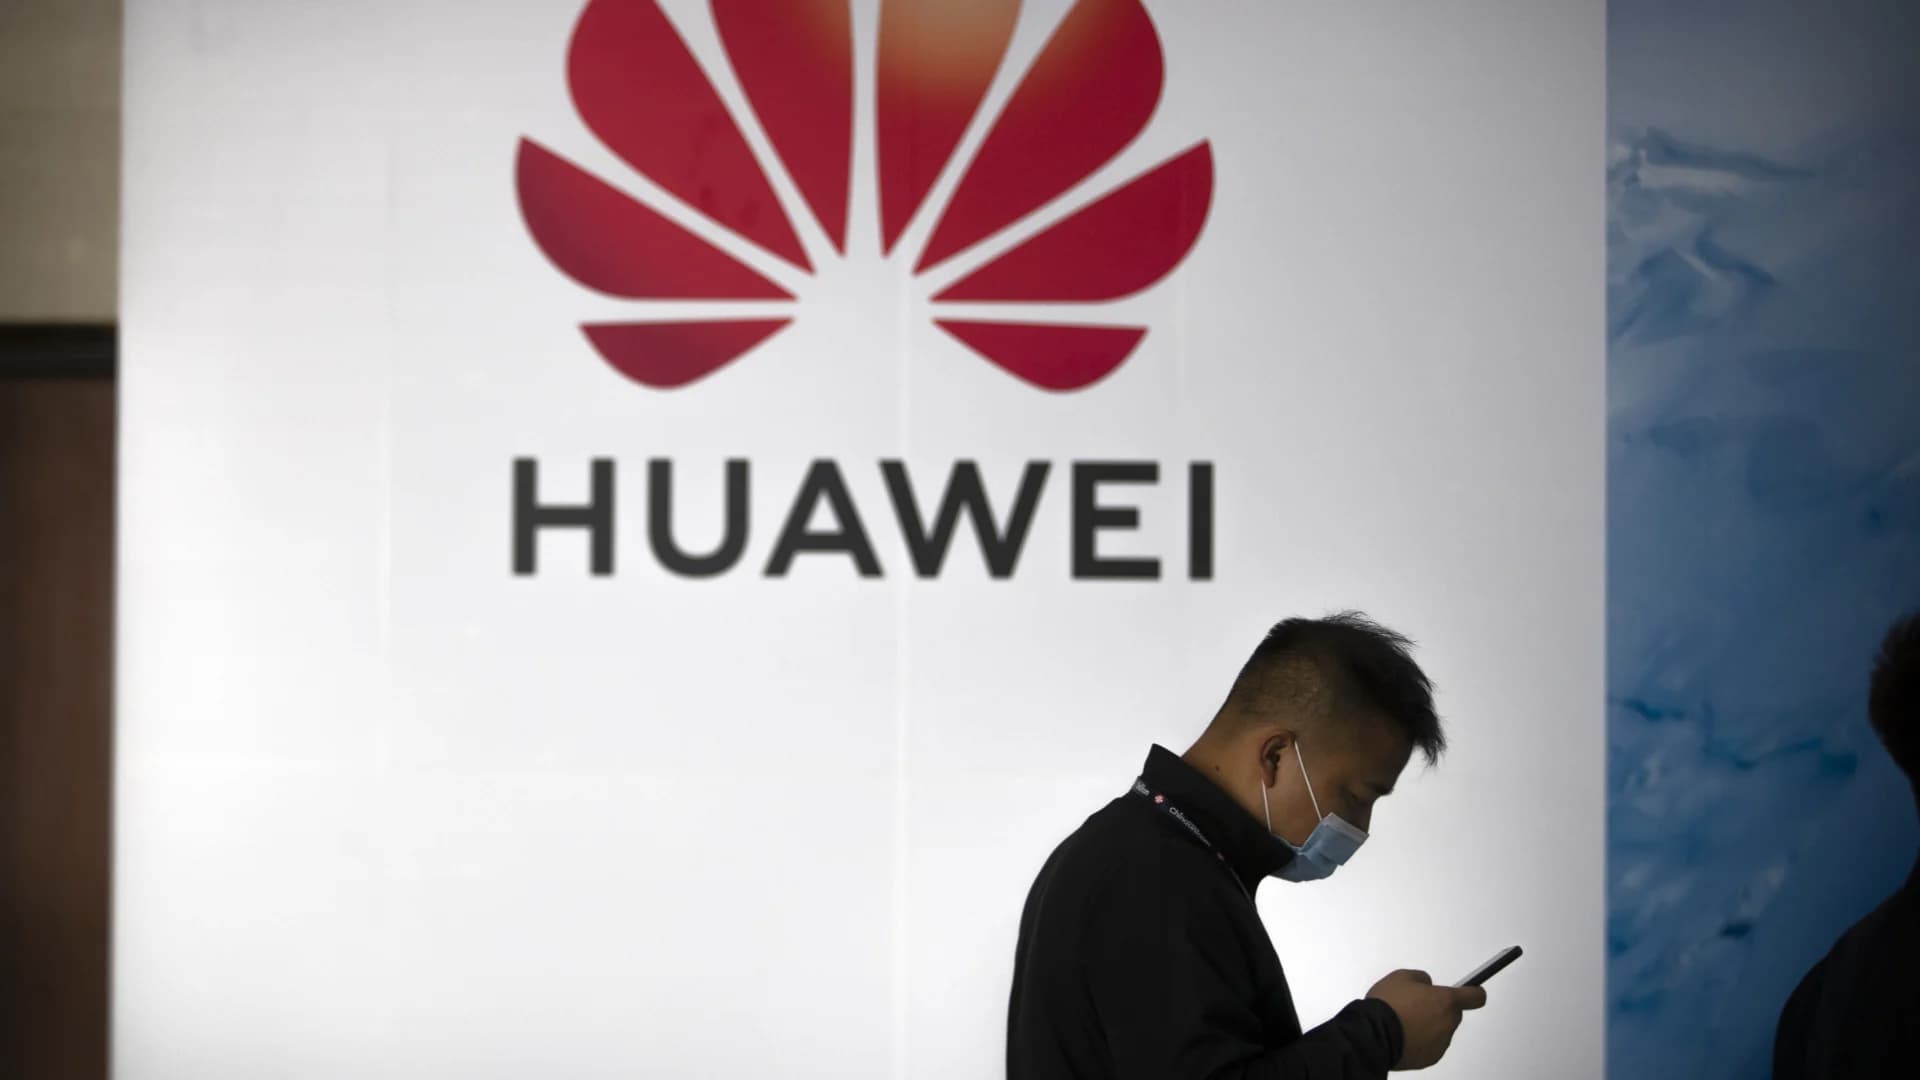 Chinese officers charged in plot to obstruct US Huawei probe